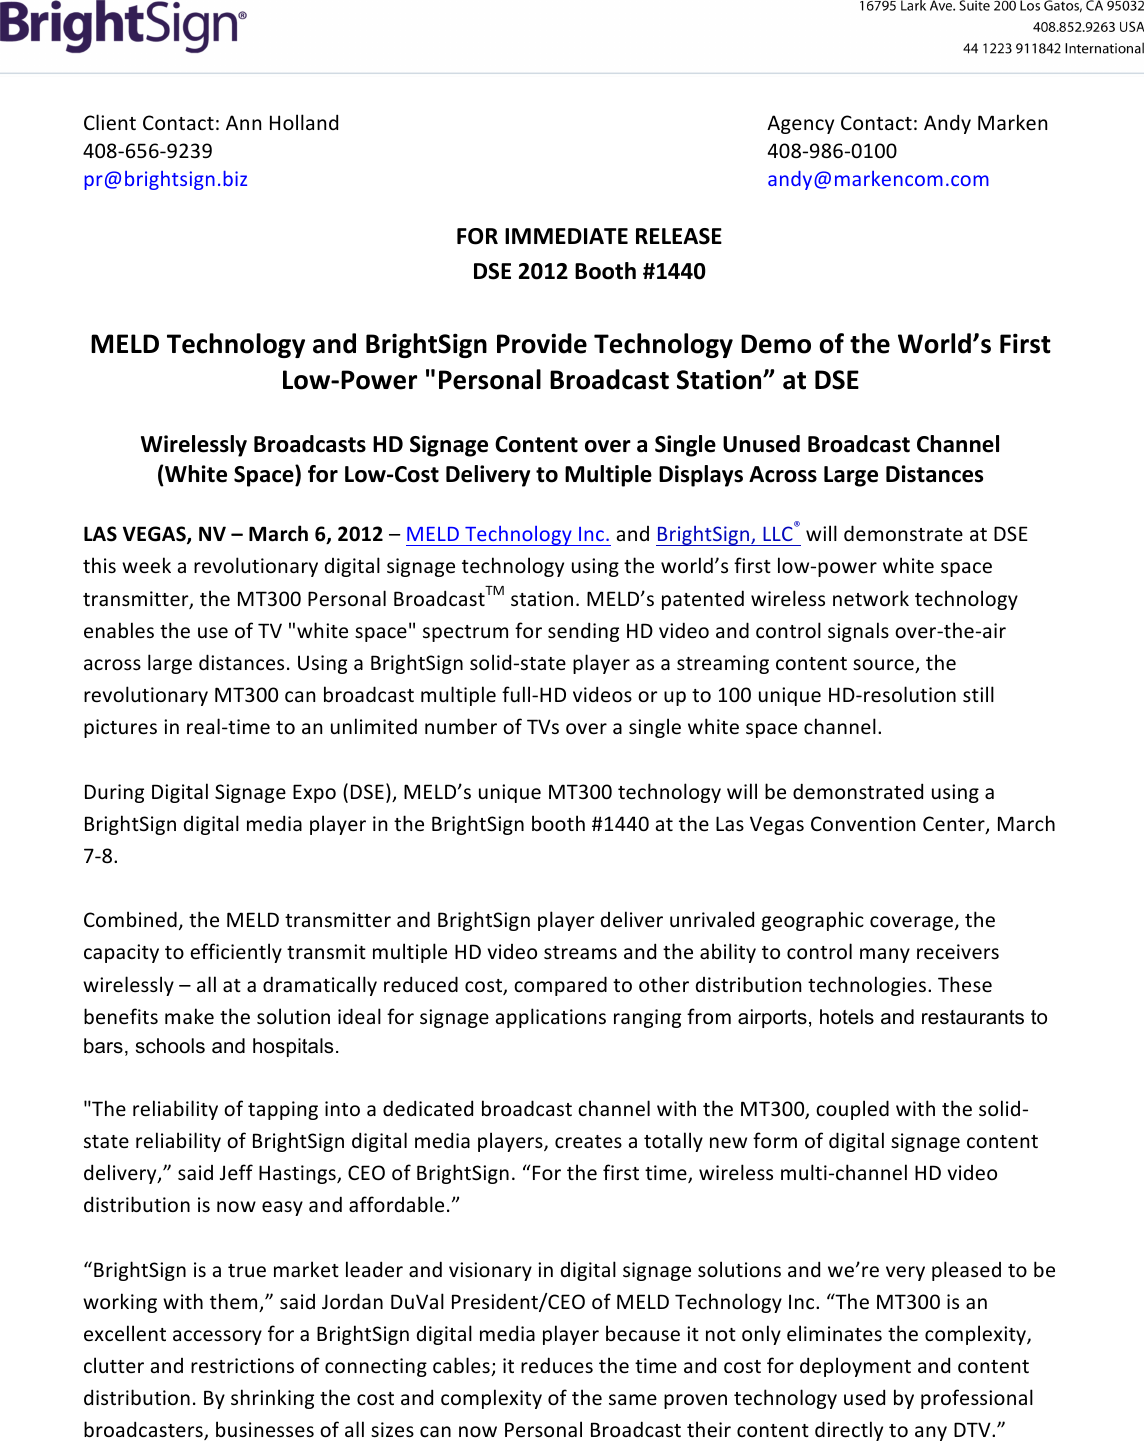 Page 1 of 3 - 03-06 DSE BrightSign MELD_  MELD Technology And Bright Sign Provide Demo Of The World First Low-Power